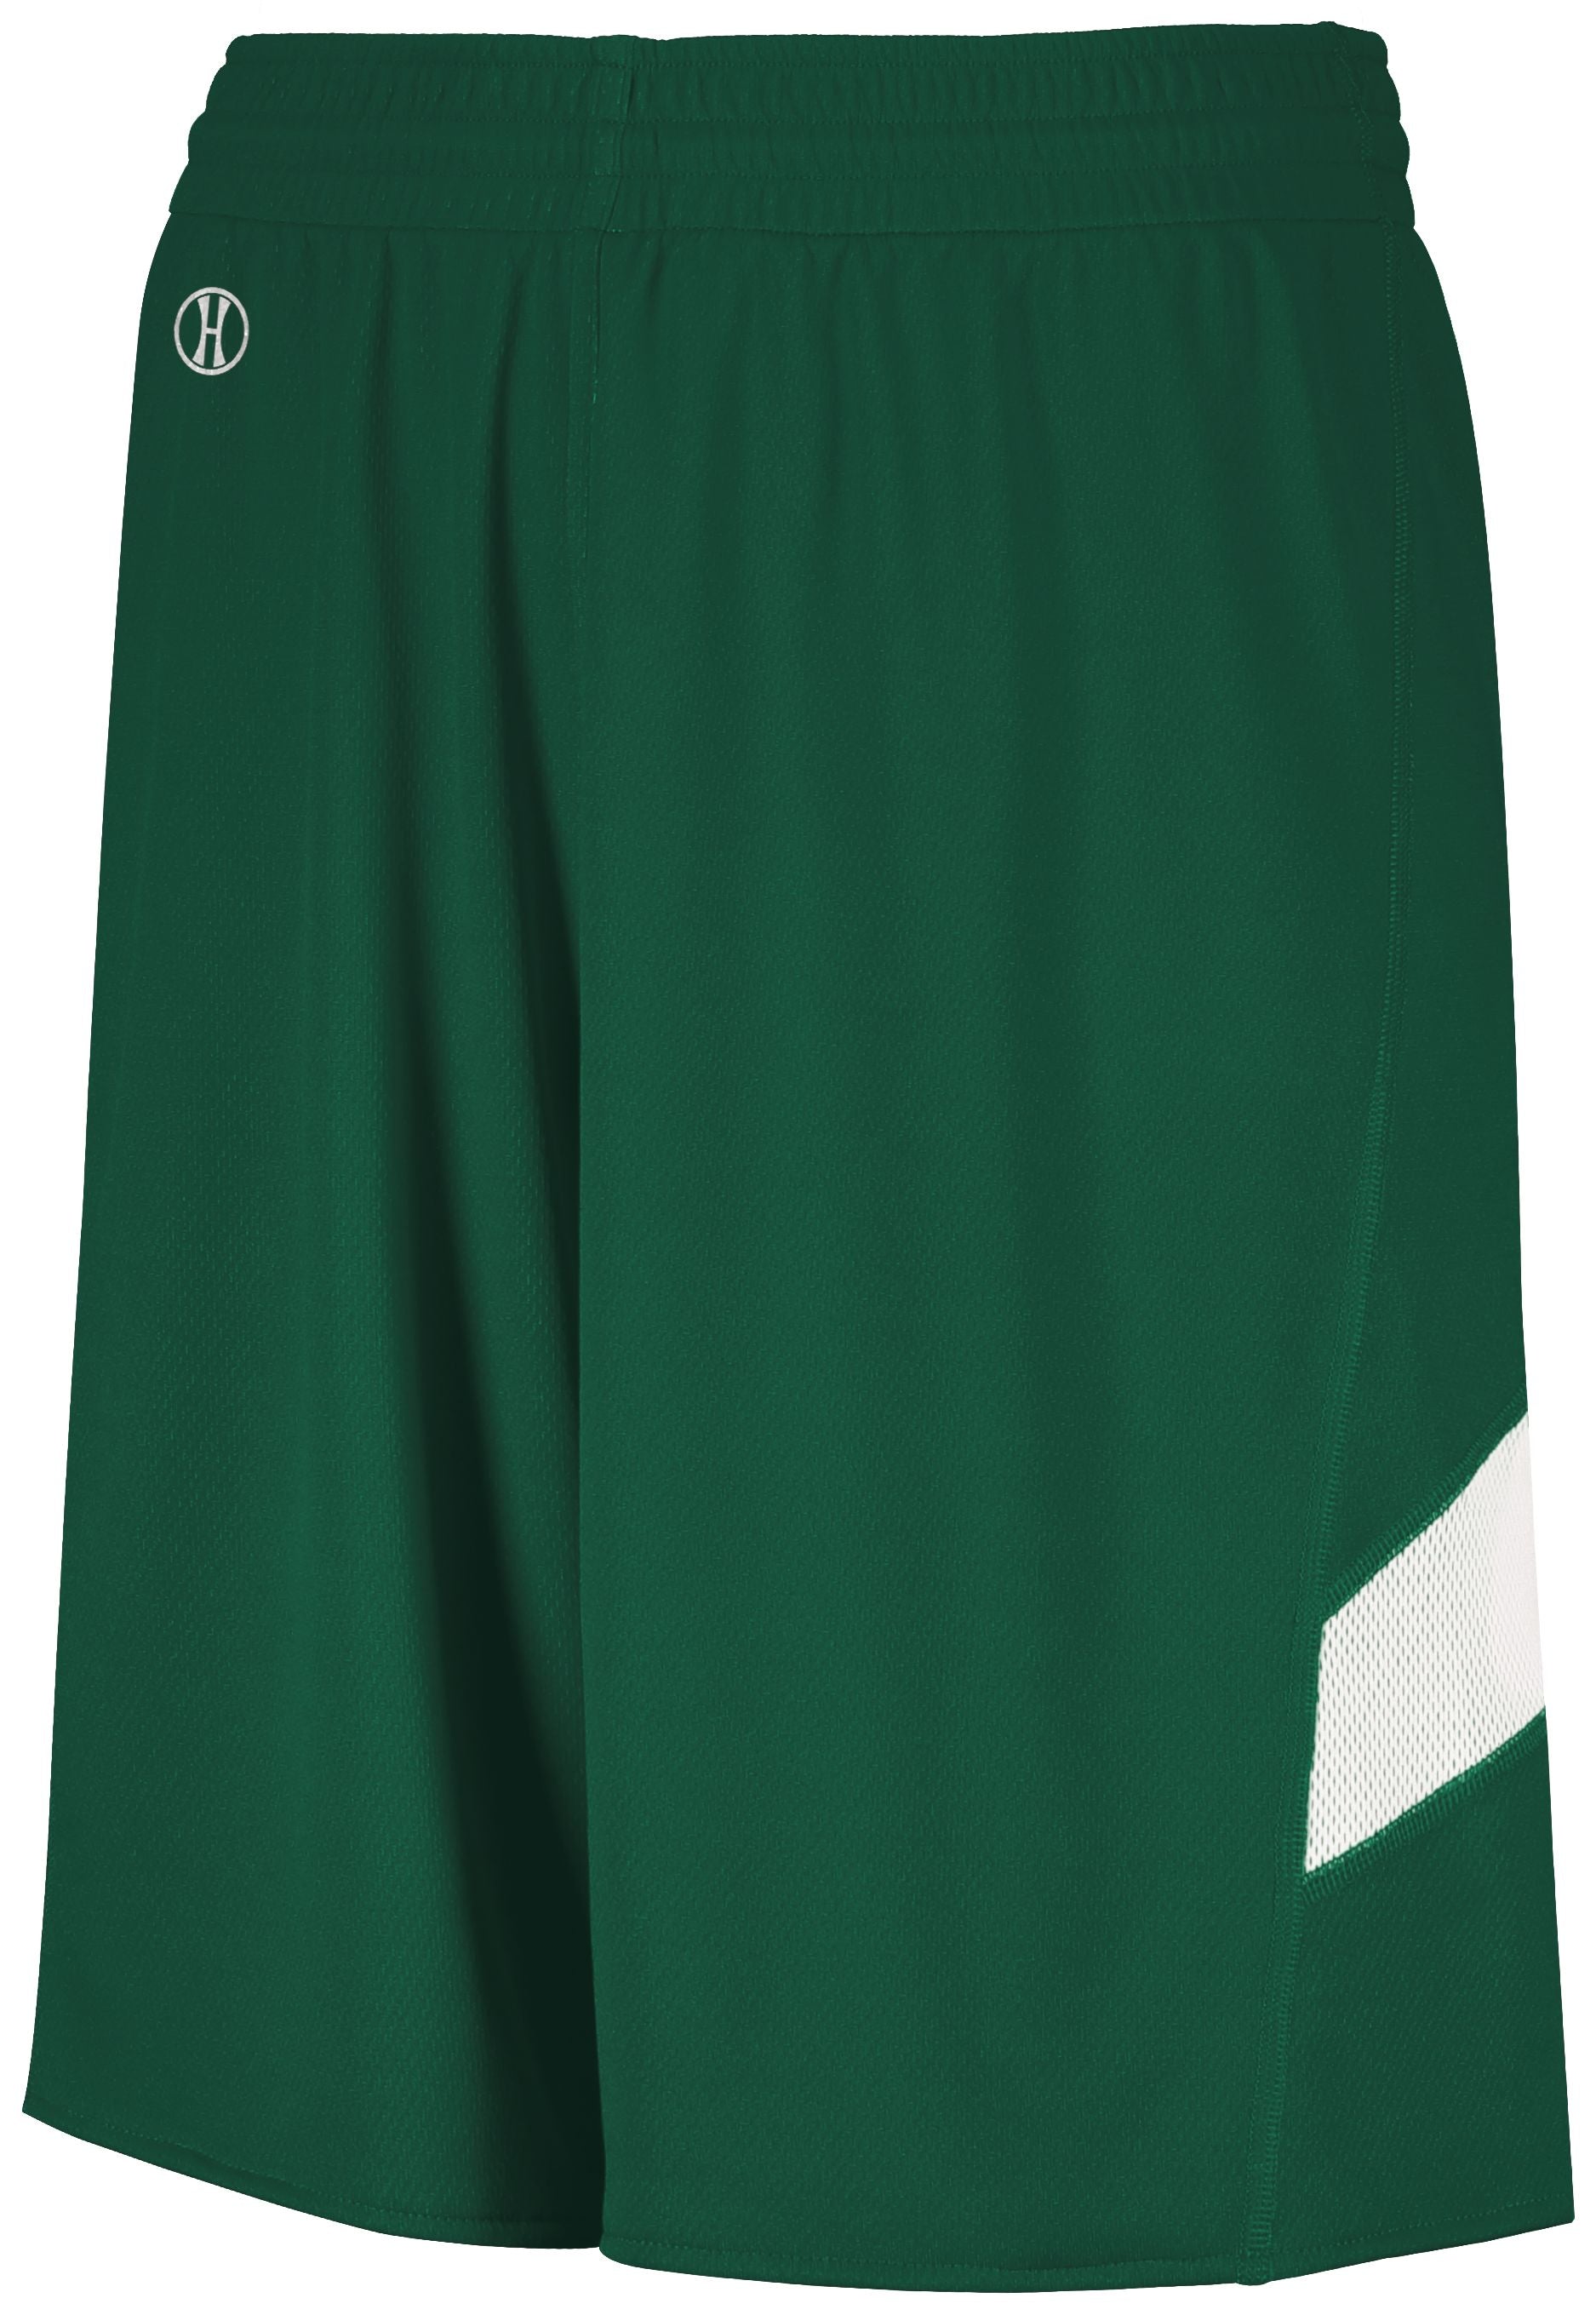 Holloway Dual-Side Single Ply Shorts in Forest/White  -Part of the Adult, Adult-Shorts, Basketball, Holloway, All-Sports, All-Sports-1 product lines at KanaleyCreations.com